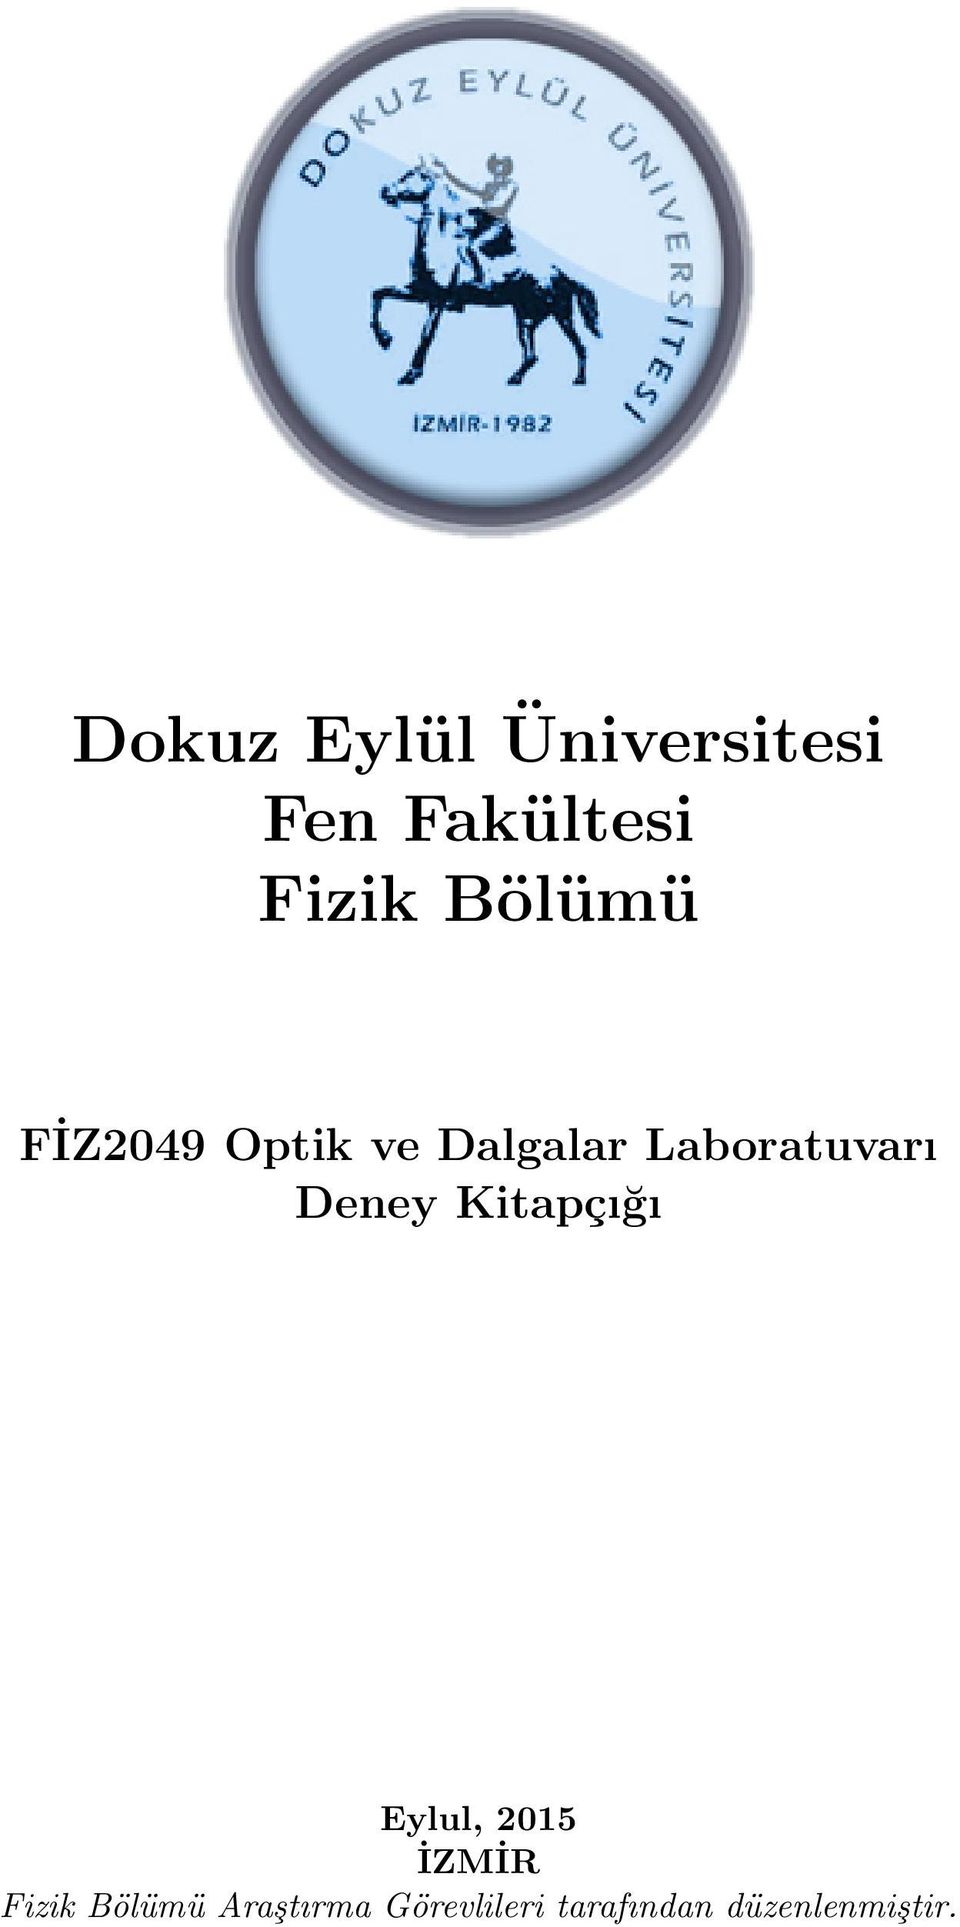 Dokuz Eylűl University In Partial Fulfilment of the Requirements for the Degree of Master of